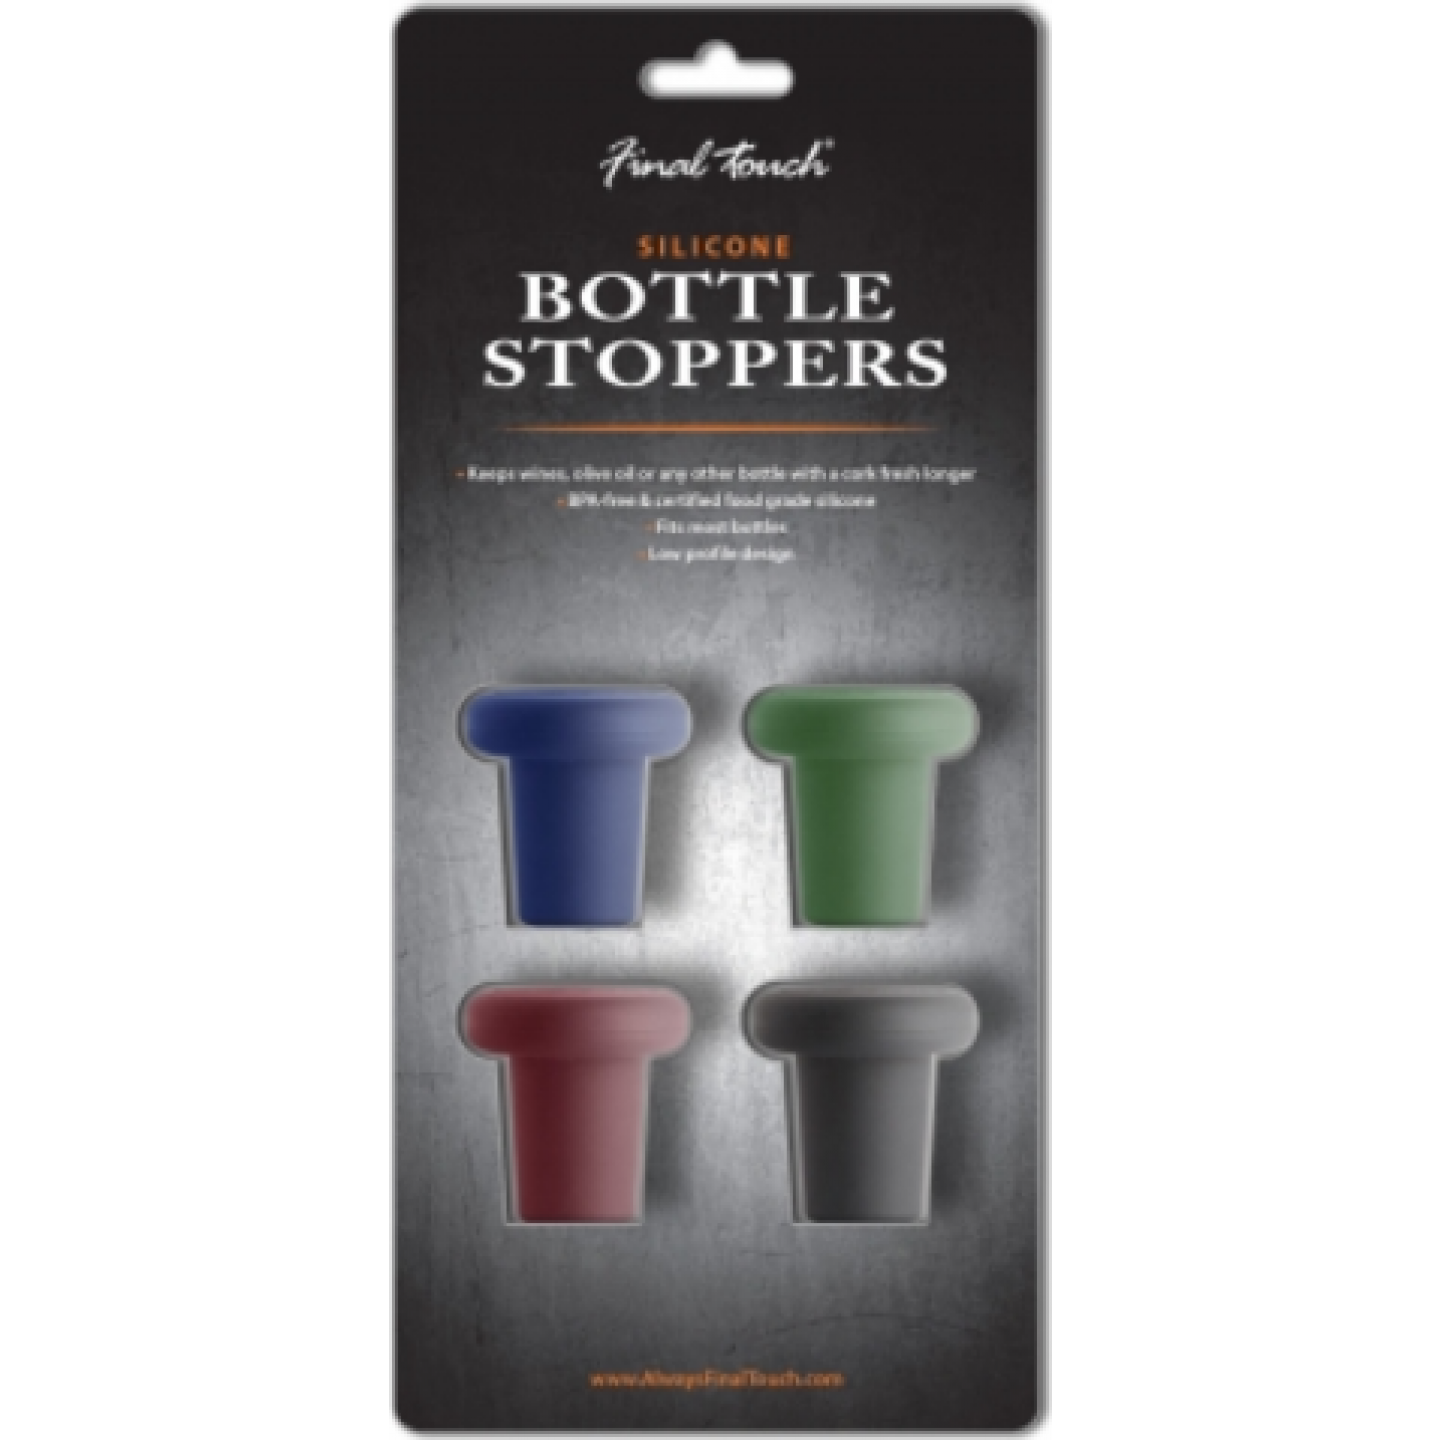 Final Touch | Silicone Bottle Stoppers (Set of 4)